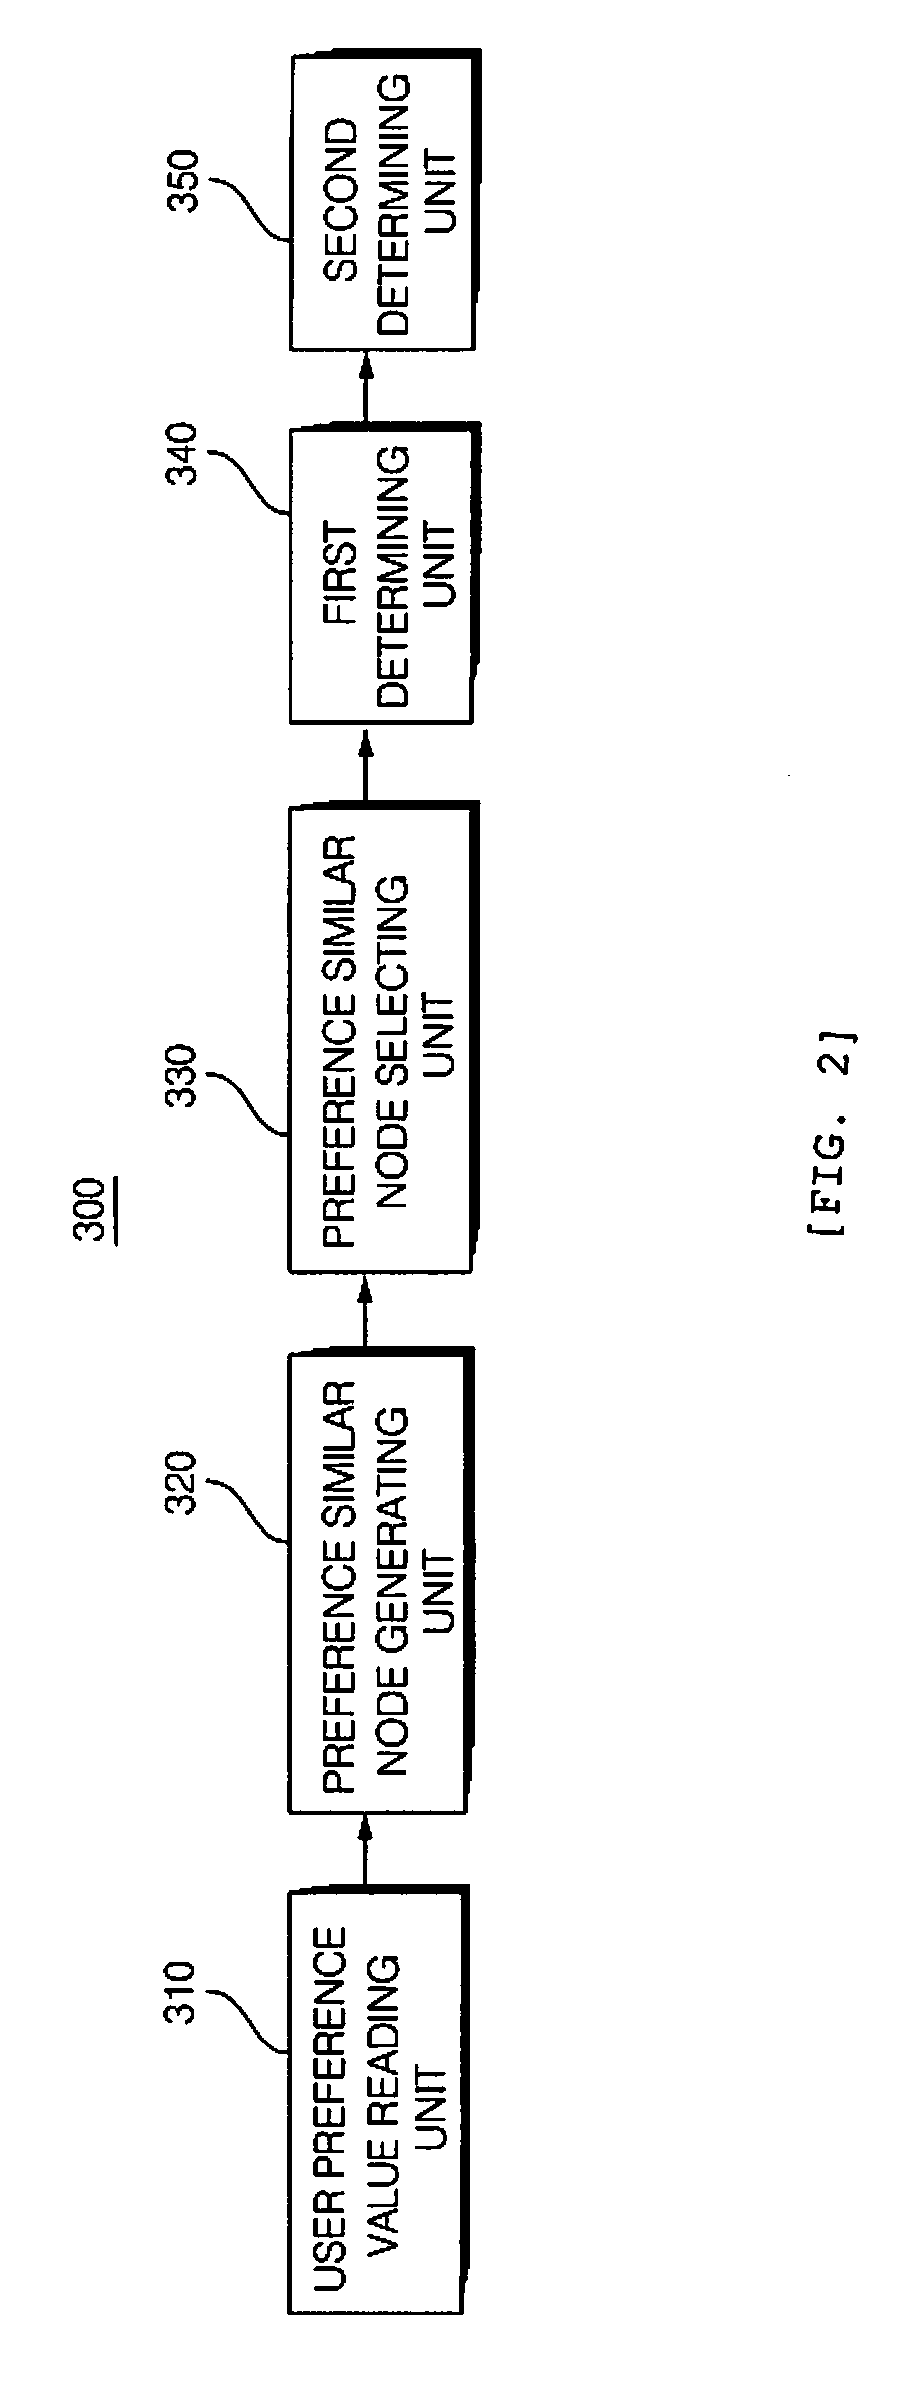 User preference-based data adaptation service system and method